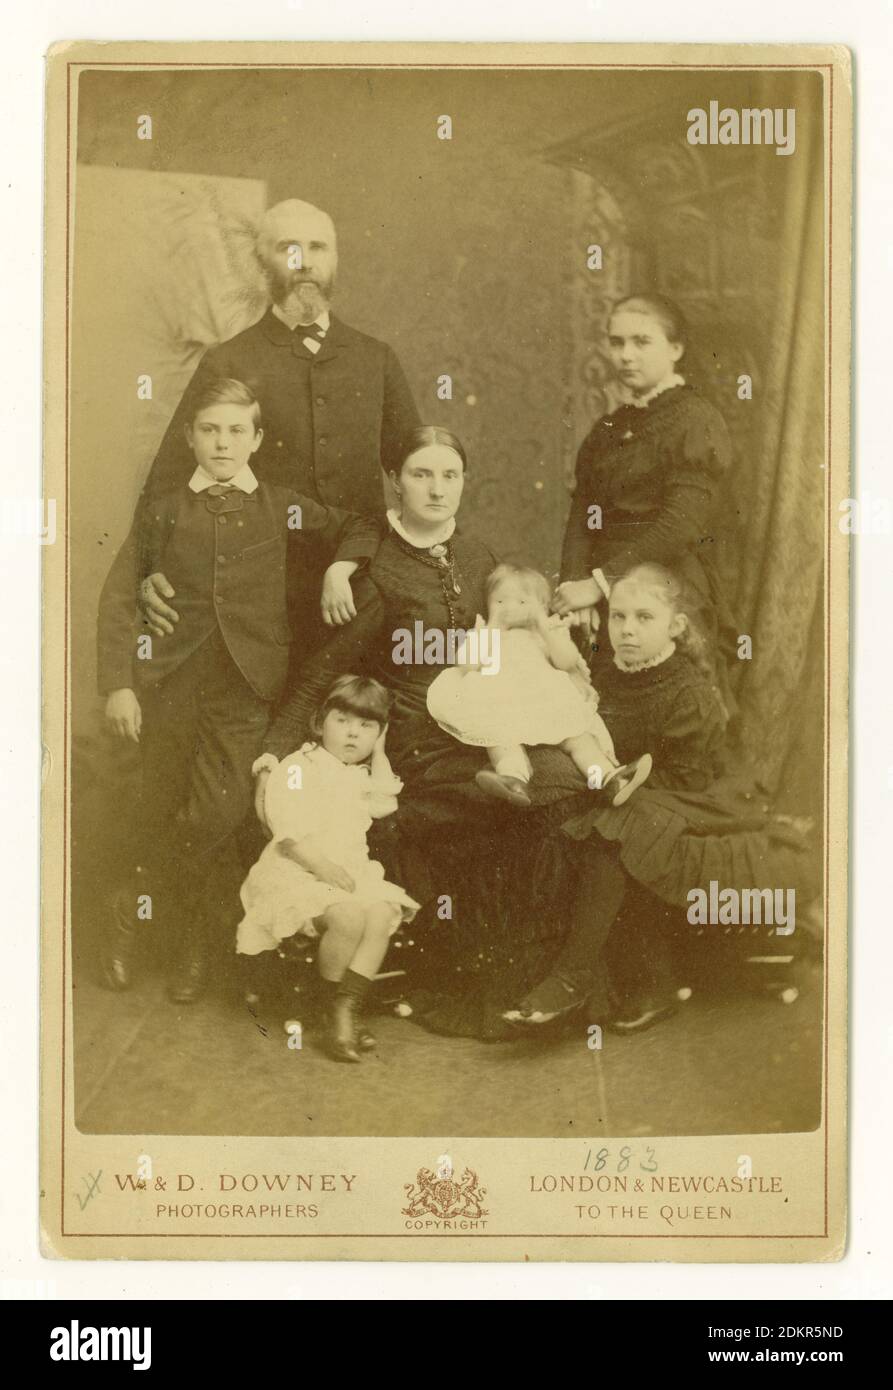 Original Victorian CDV (Carte de Visite) of a family of 5 children, including a baby. From the studio of W. & D. Downey, (photographers to the Queen) based at London and Newcastle, dated 1883 on the front. Stock Photo